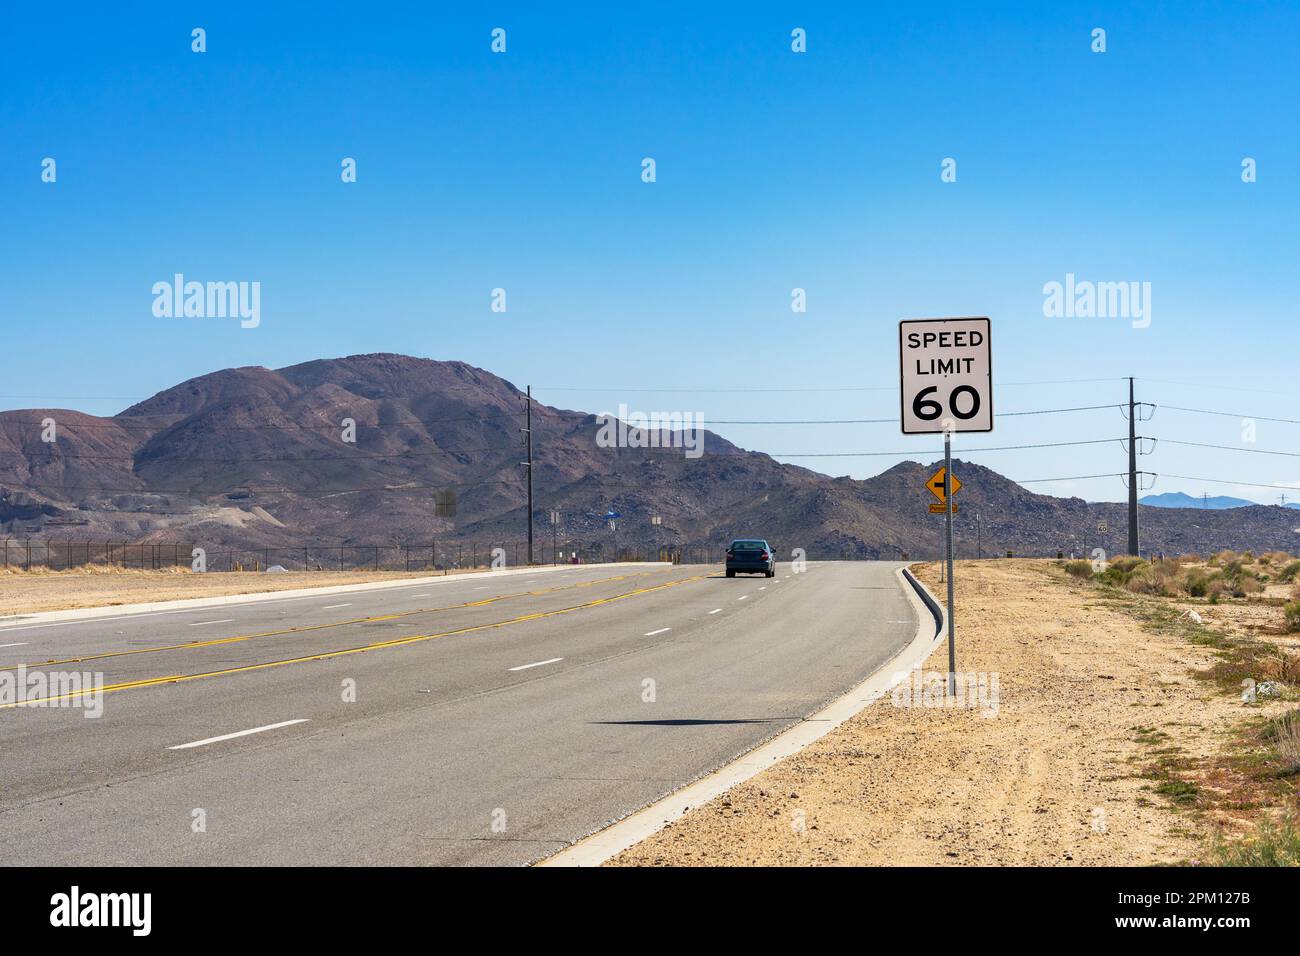 A 60 Speed Limit street sign on a on rural road in the Mojave Desert in California Stock Photo